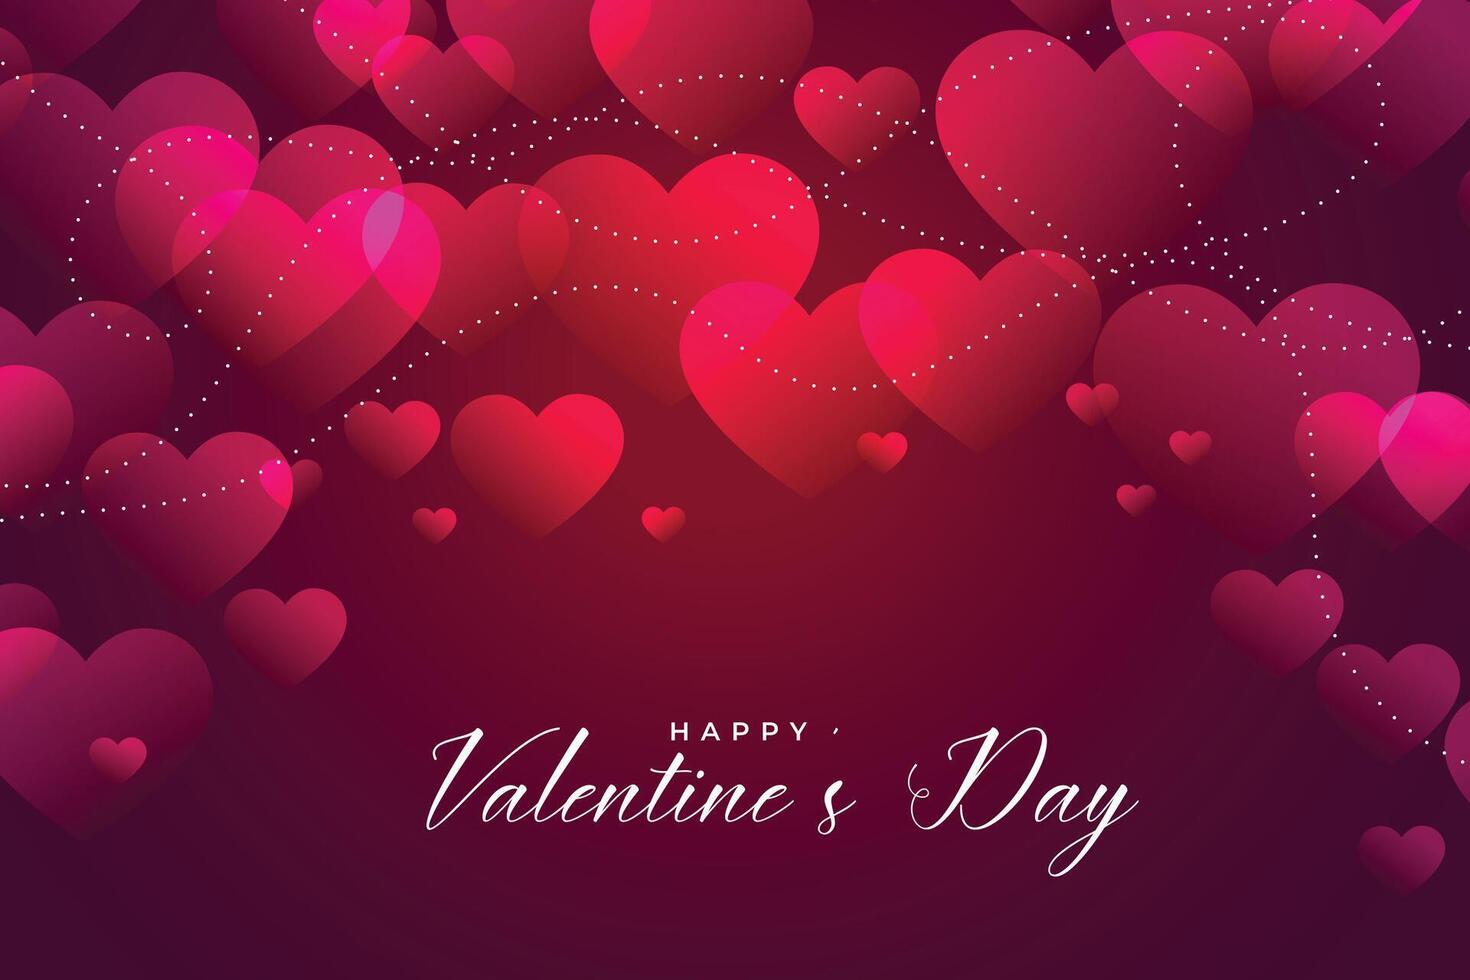 shiny pink valentines day hearts background design vector